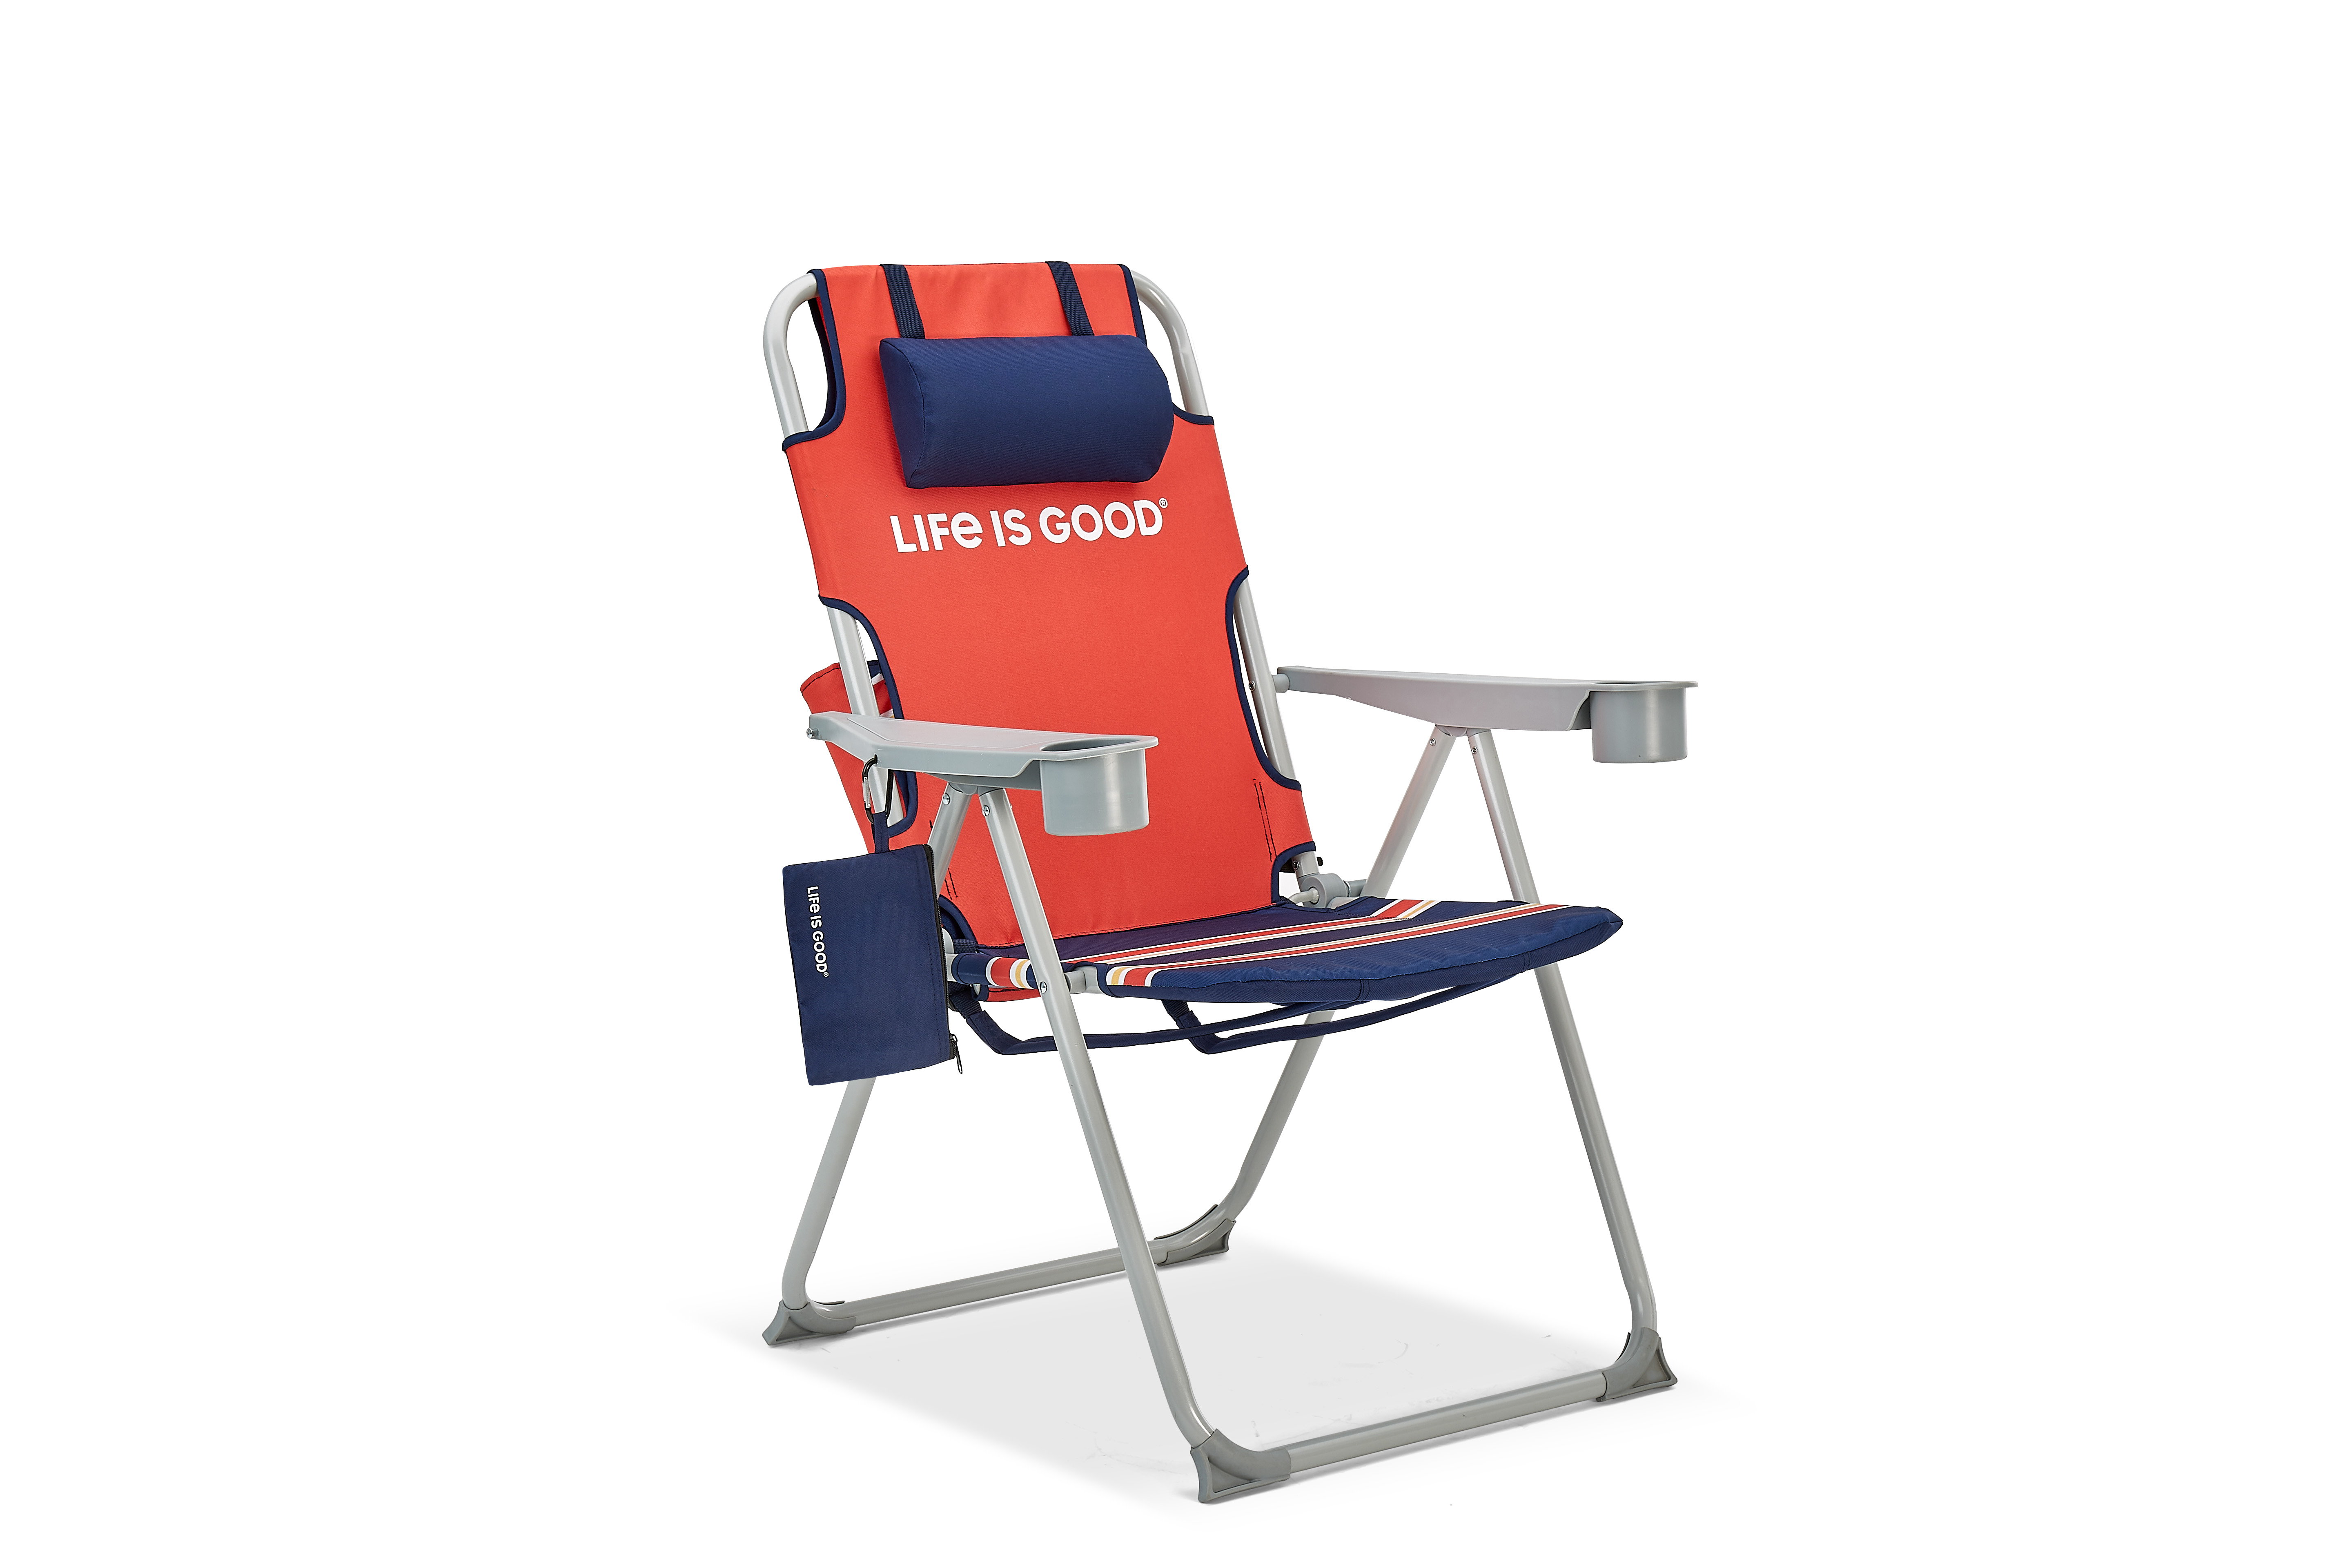 Life is Good Backpack Lawn Chair - Silver Frame - Orange Daisy - image 1 of 2